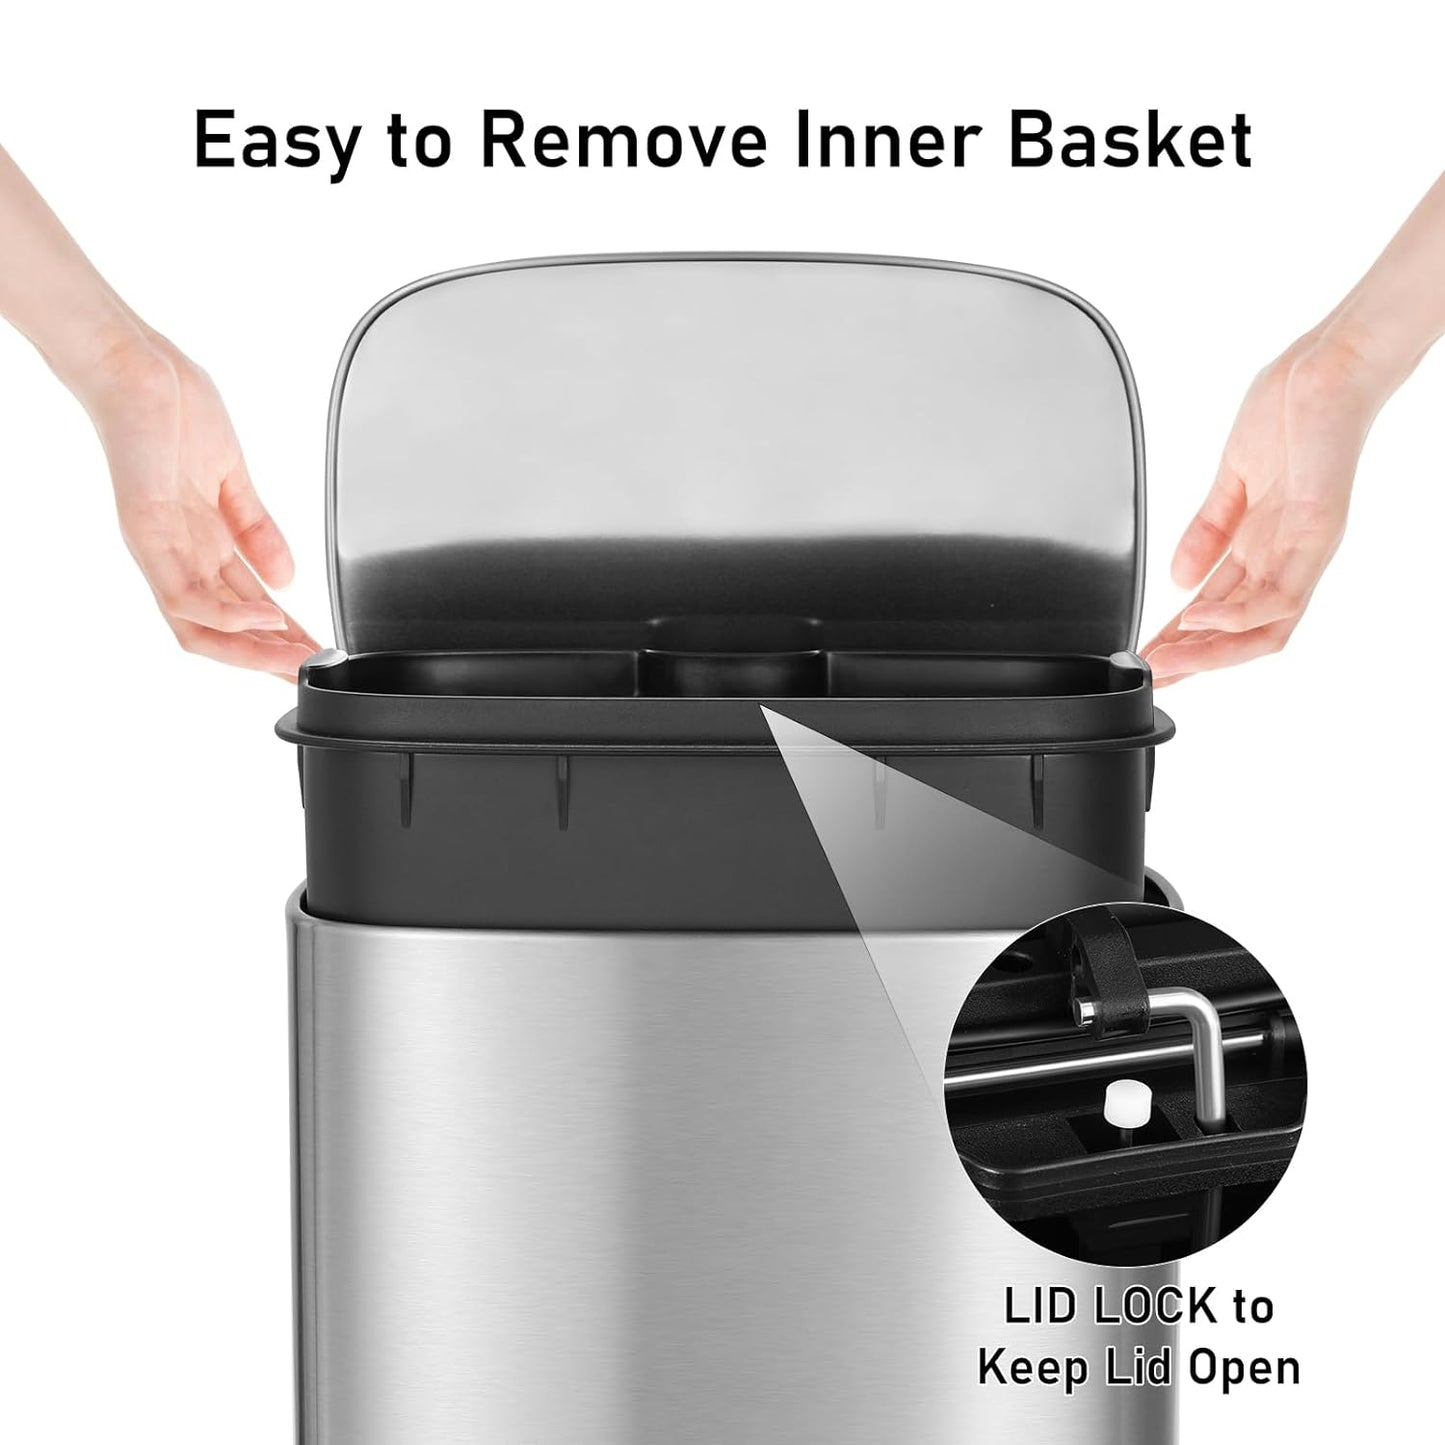 Arlopu 13.2+1.3 Gallon Step Trash Can, Stainless Steel Garbage Bin, Soft-Close Rubbish Bin with Removable Plastic Inner Bucket, Fingerprint-Proof Dustbin with Lid, for Kitchen